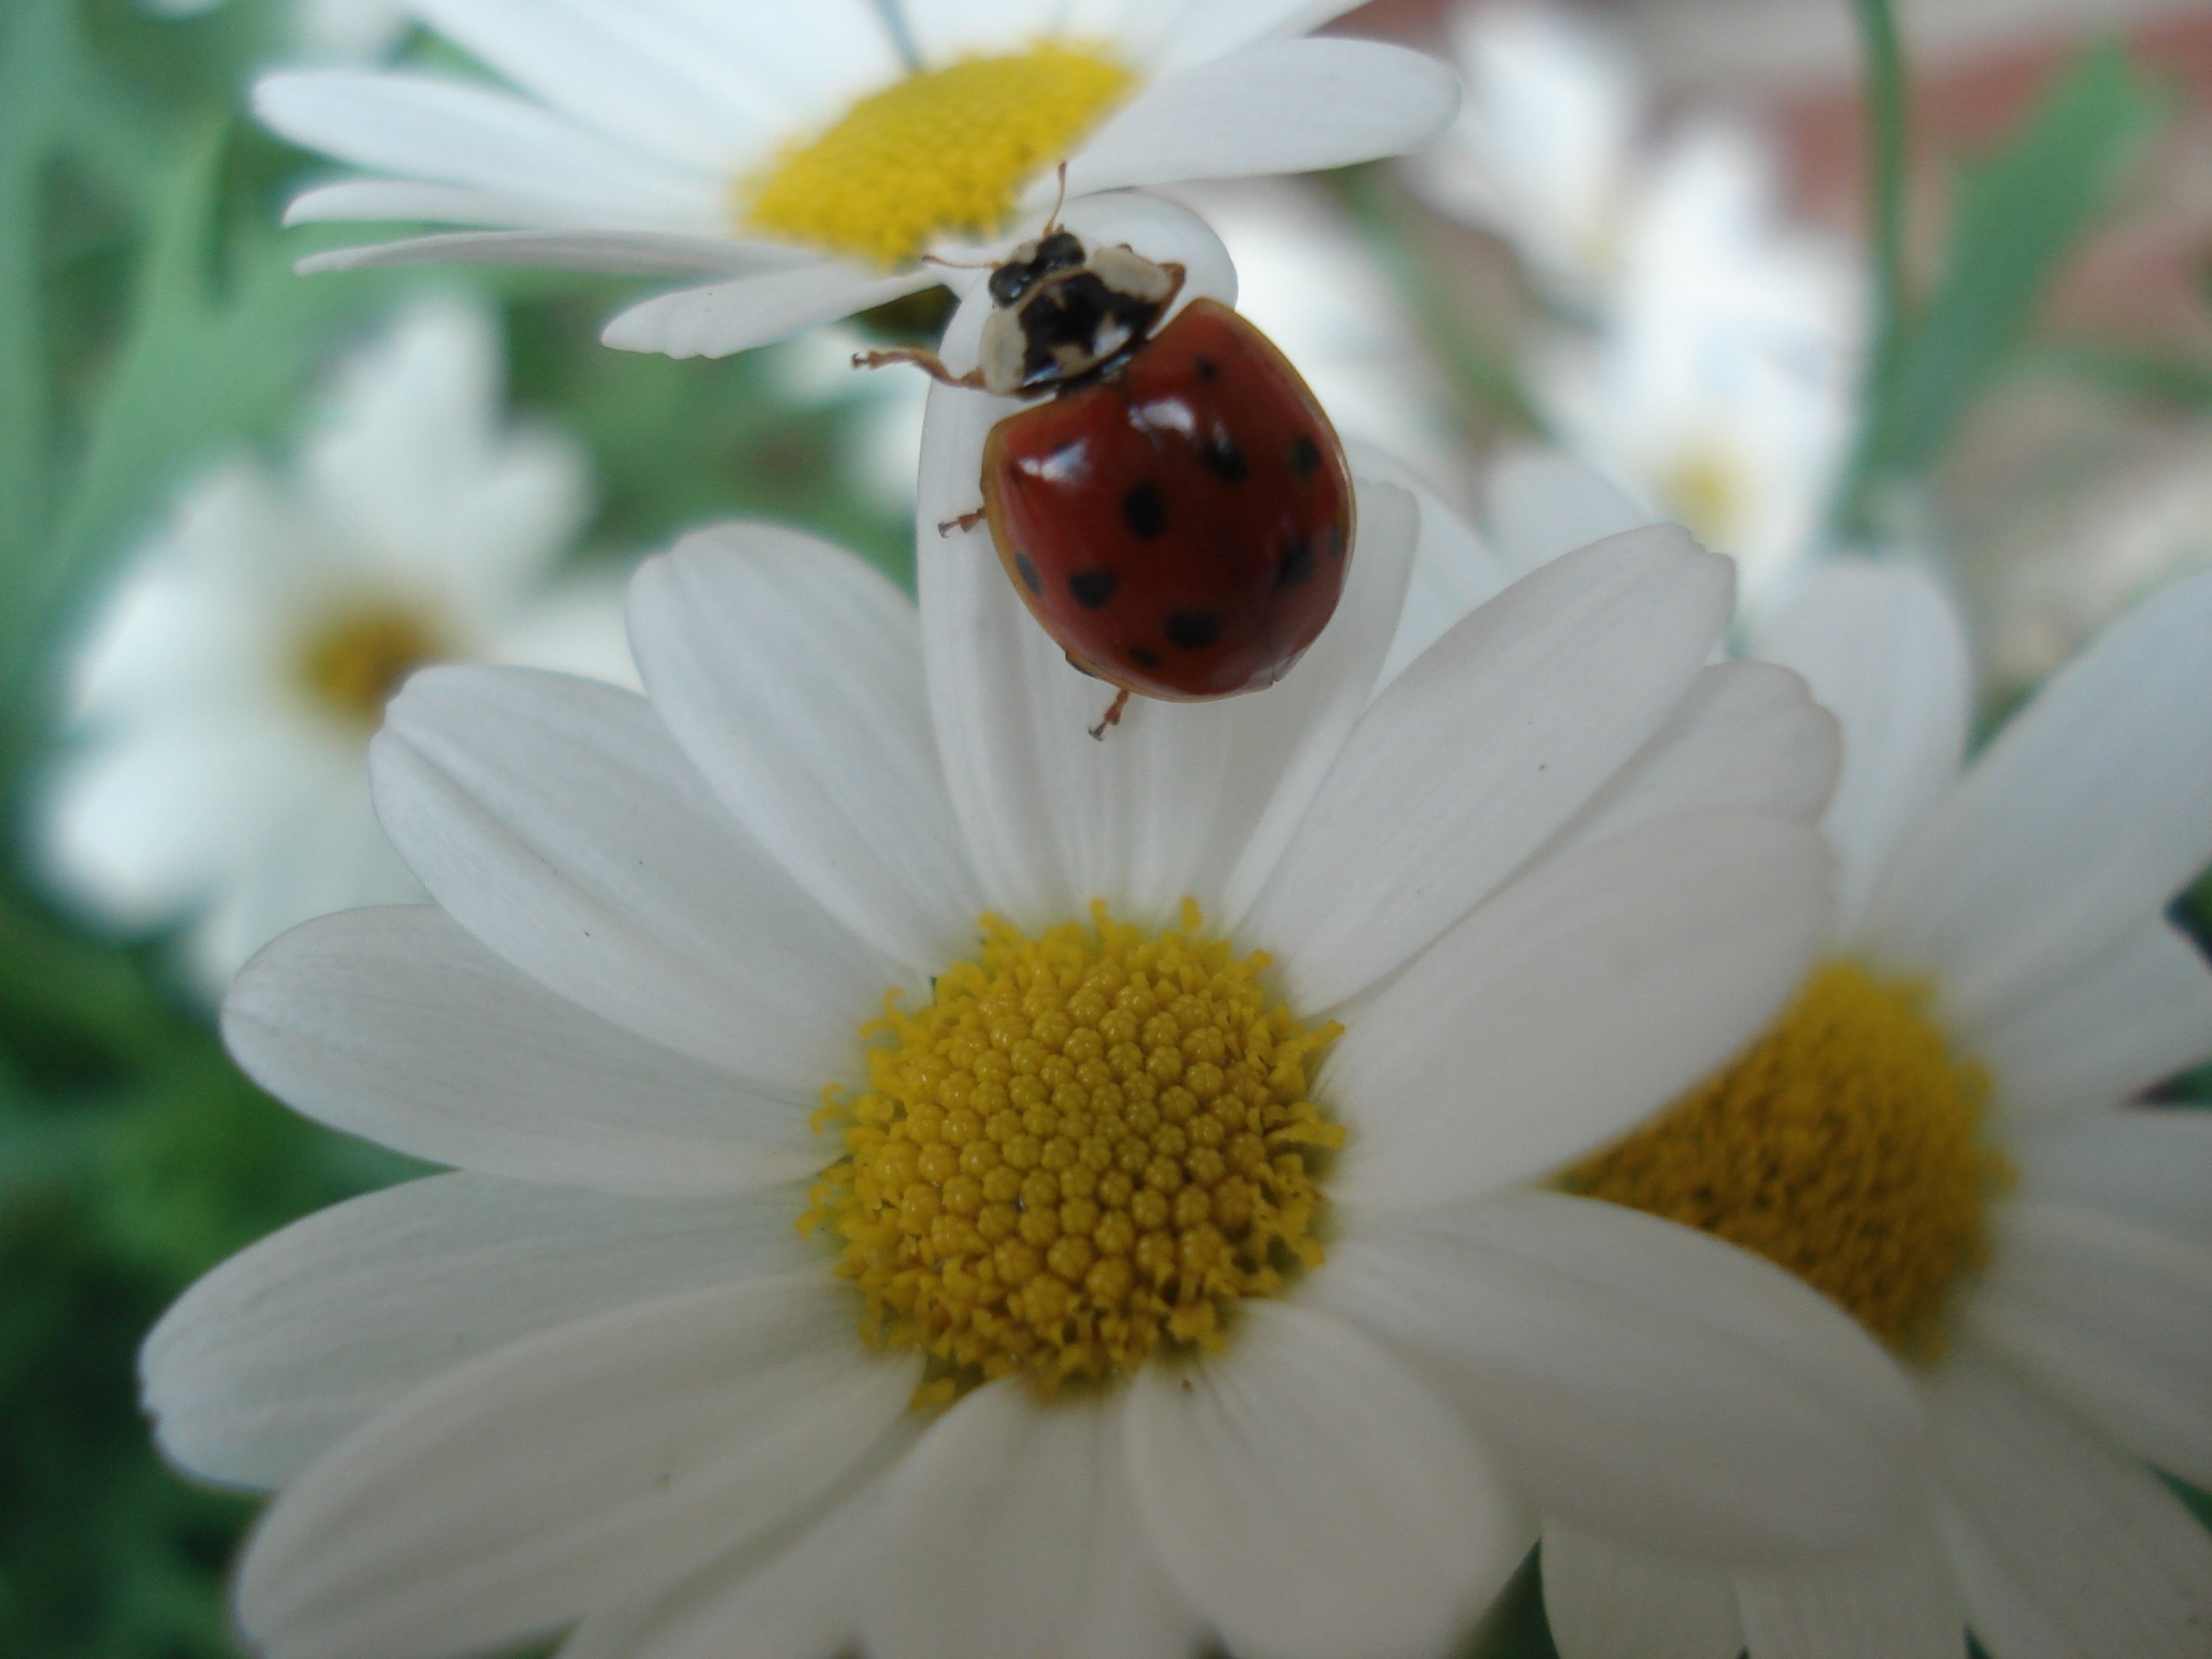 2816x2112 spotted ladybug and white daisy flower